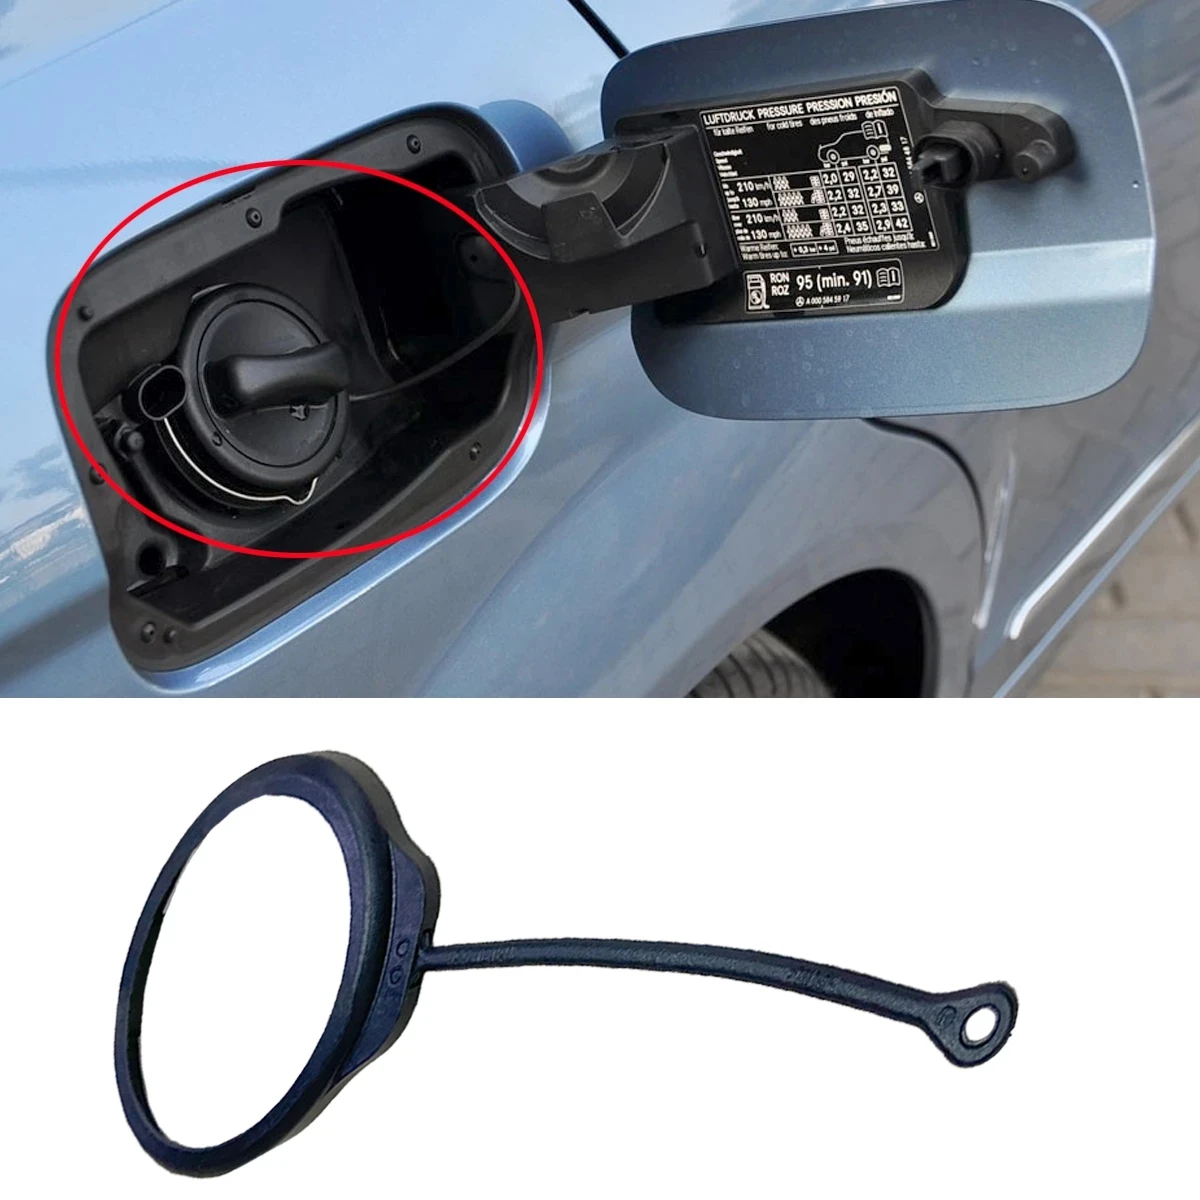 New Fuel Cap Tank Cover Cable Rope For Mercedes Benz C CLK CLS Cl E G GL S SL SLK W203 W204 W205 W212 W220 W211 W221 Accessories